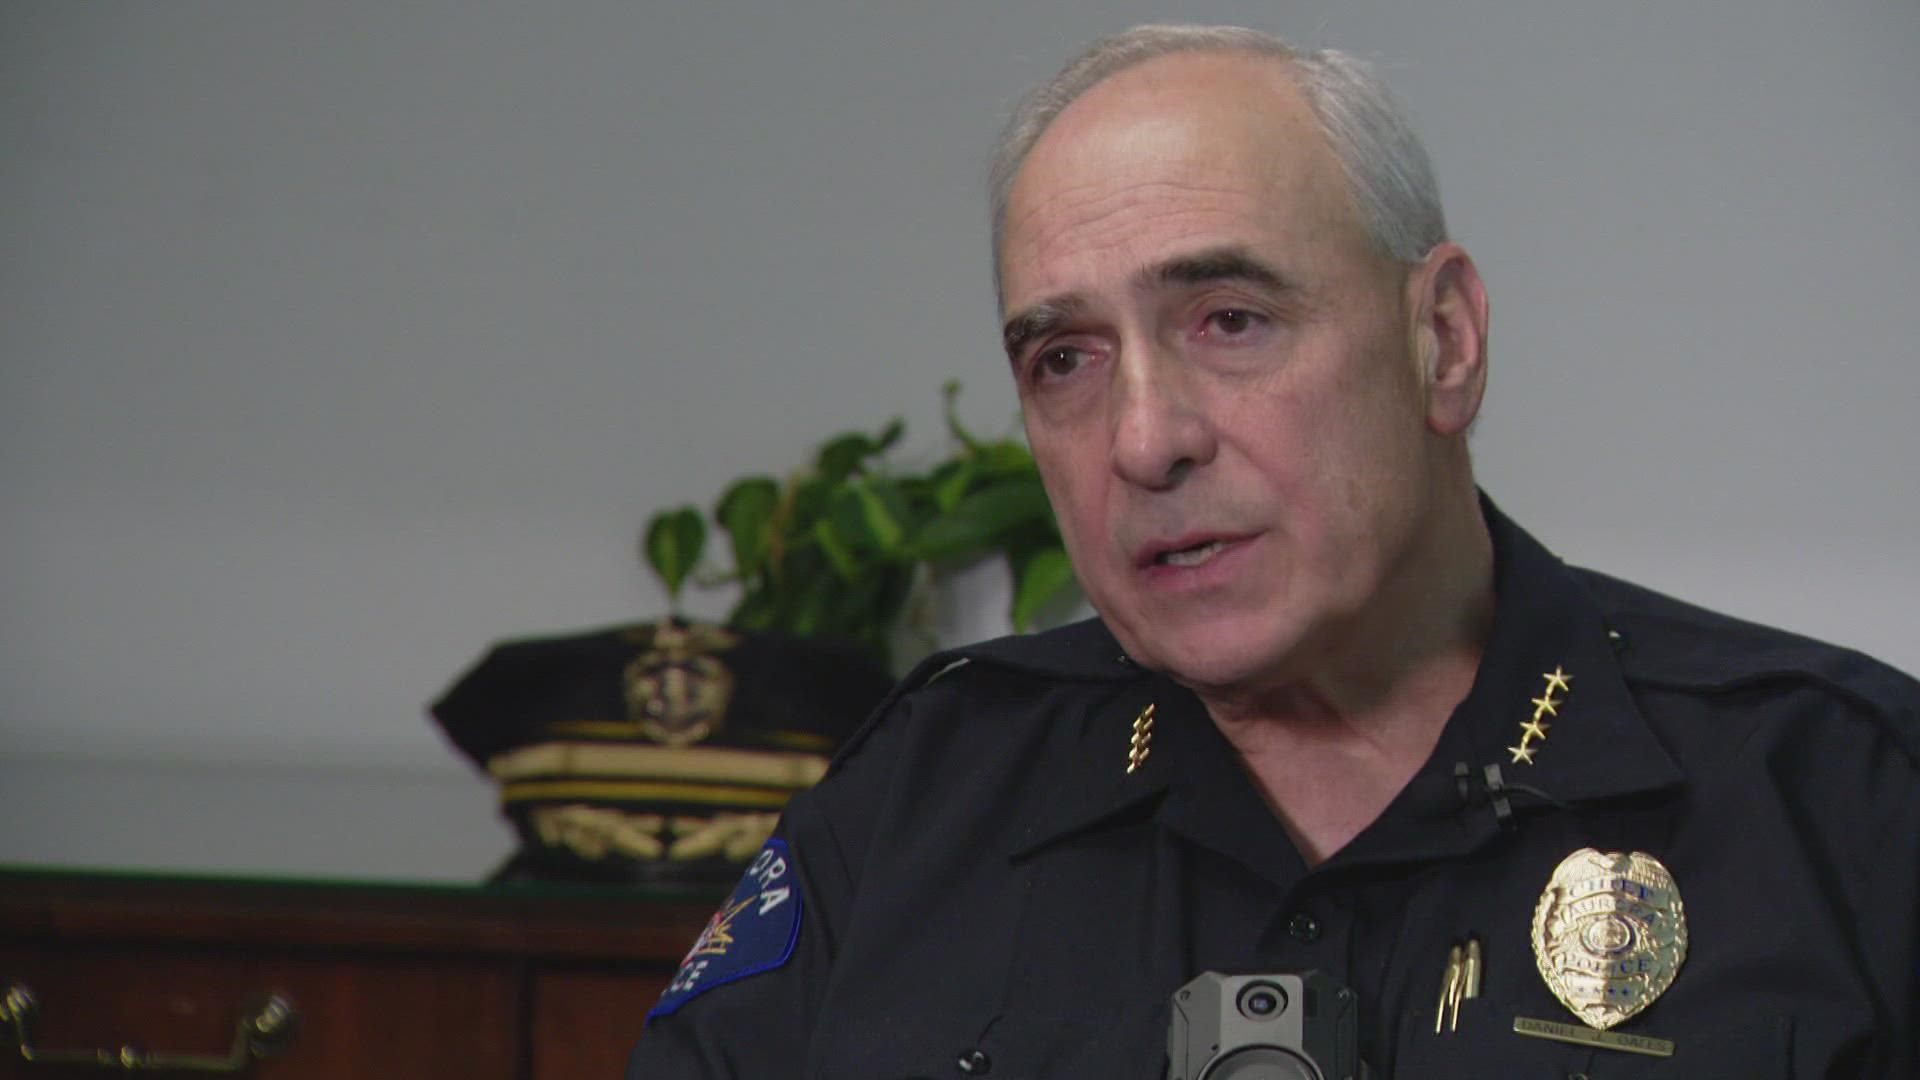 Longtime Aurora Police Chief Dan Oates is back on the job. 9News Crime &Justice reporter Matt Jablow sat down with Oates today to talk about his short-term vision.